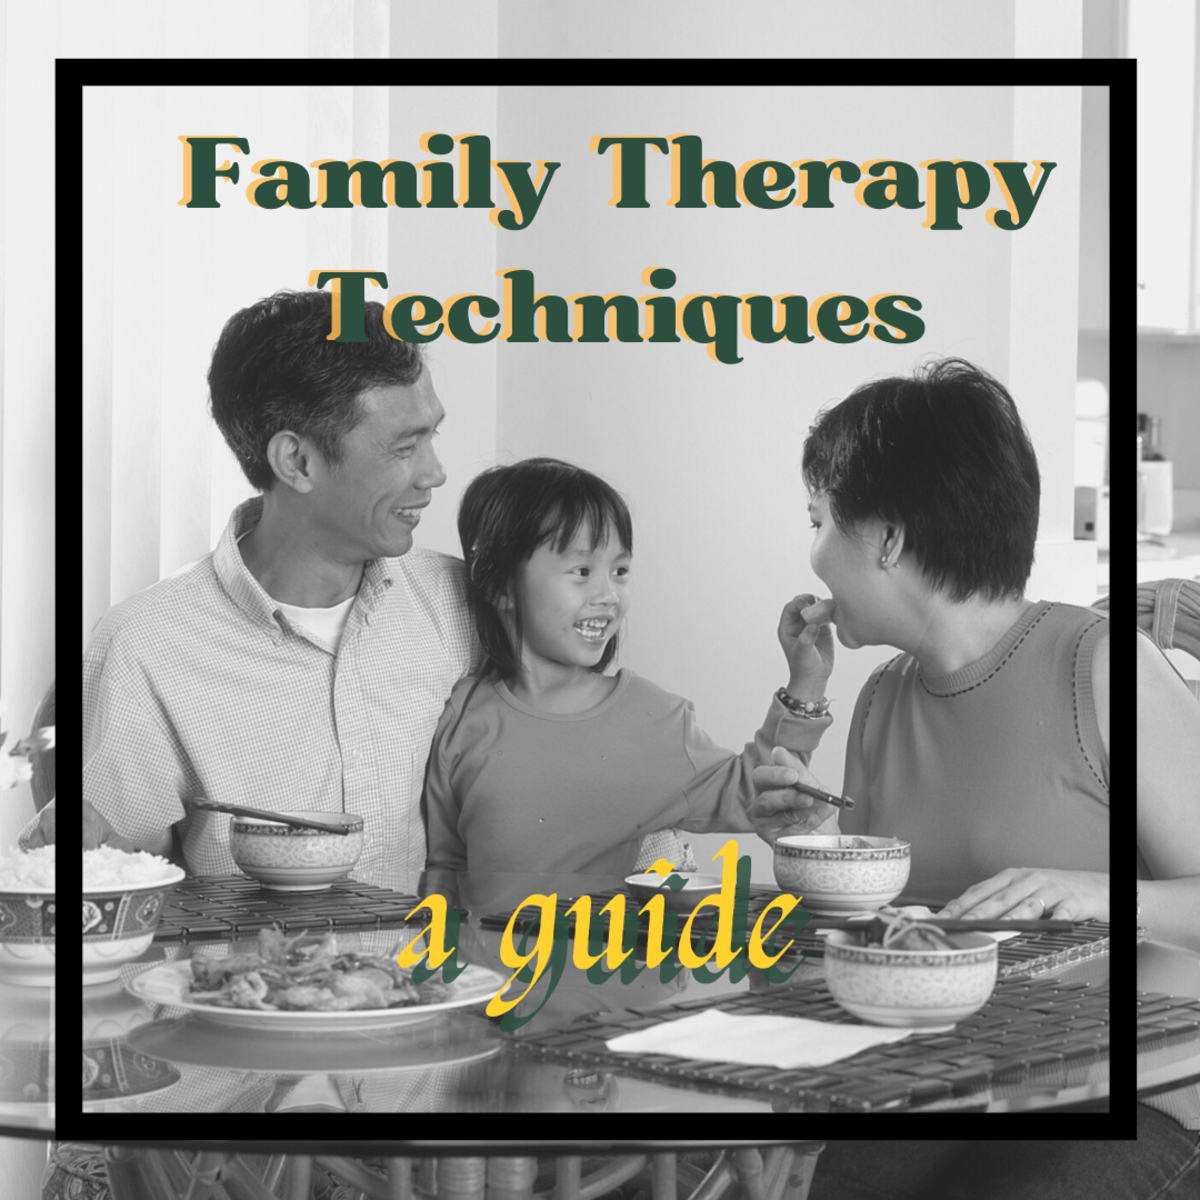 Family therapy can give you tools to enhance your family functioning.